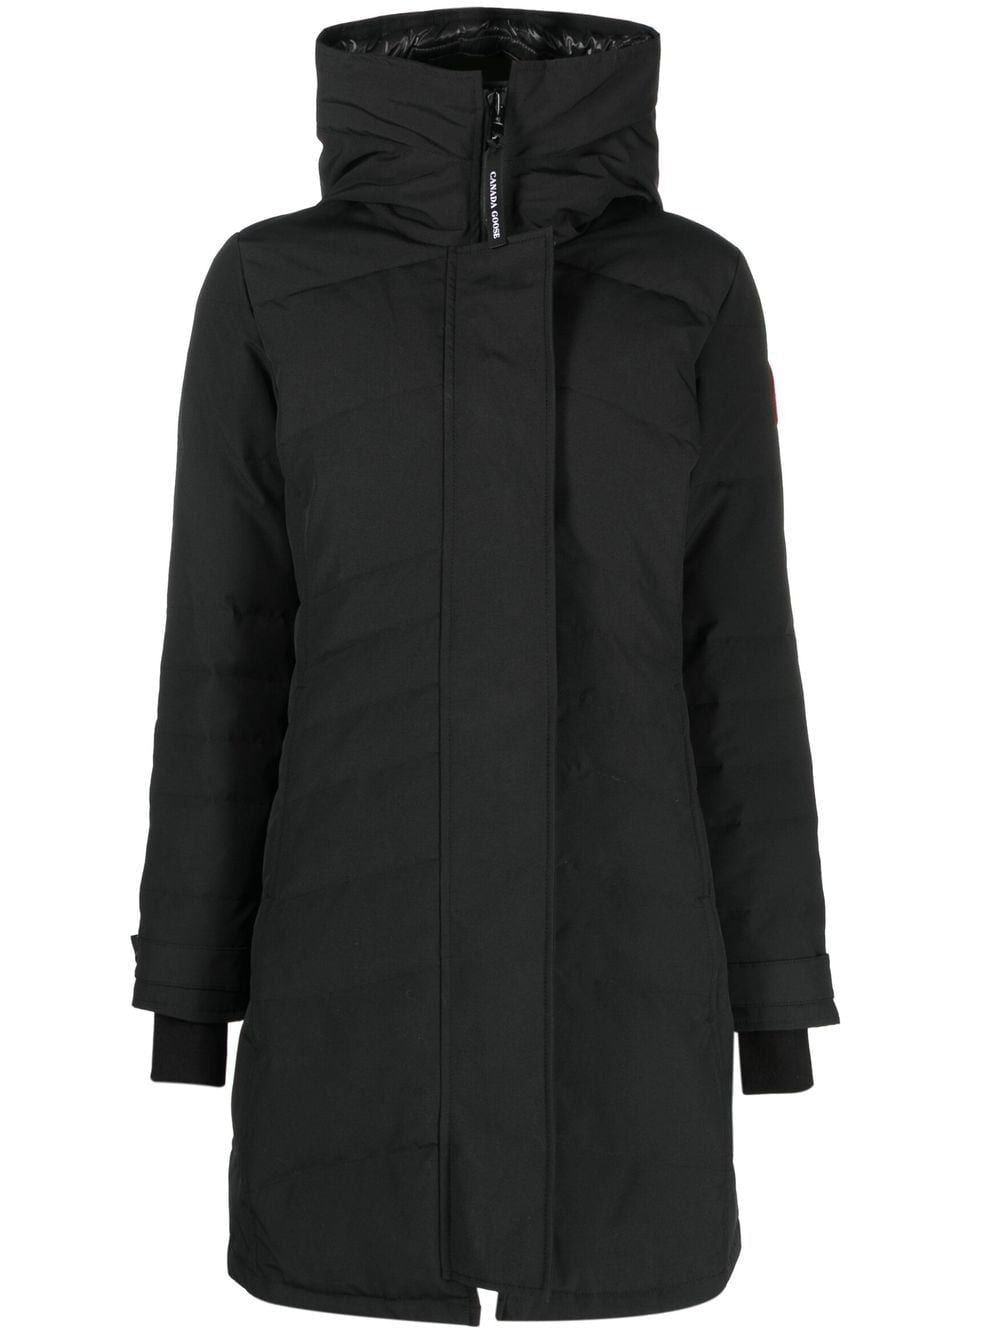 CANADA GOOSE Streamlined Hood Parka Jacket for Women - Sophisticated Down-Filled Style for FW23